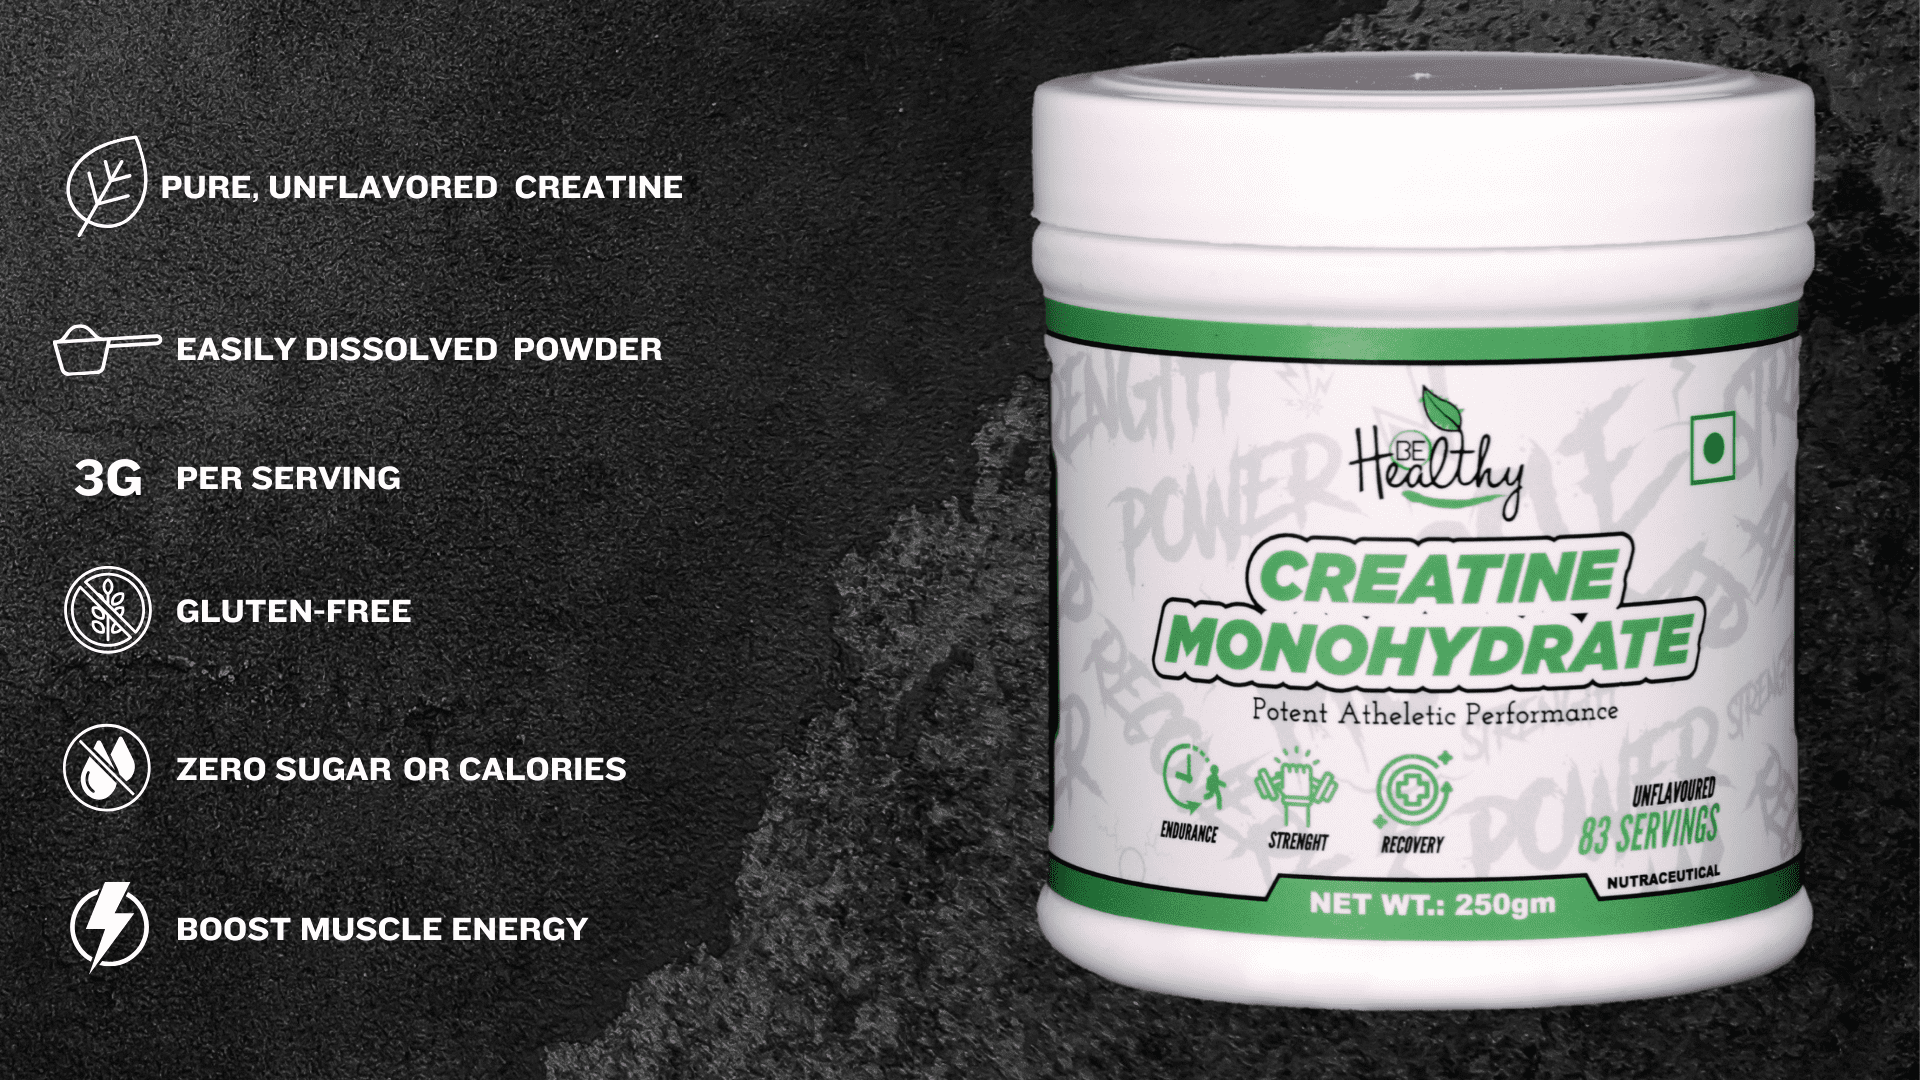 creatine monohydrate india buy creatine monohydrate india best creatine monohydrate india creatine monohydrate price india creatine powder india gym supplements india (consider including this for broader reach, as creatine is often used for strength training) fitness supplements india creatine benefits india Be Healthy creatine monohydrate india Be Healthy creatine powder india Be Healthy Creatine Monohydrate reviews india creatine monohydrate for muscle building india creatine monohydrate for strength india creatine monohydrate for performance india creatine monohydrate for recovery india creatine monohydrate side effects india (important to address potential concerns) creatine monohydrate dosage india best creatine monohydrate for beginners india which creatine monohydrate is best in india how to use creatine monohydrate india creatine monohydrate benefits for women india creatine monohydrate vs creatine blends india best creatine monohydrate brands india affordable creatine monohydrate india creatine monohydrate side effects and benefits india